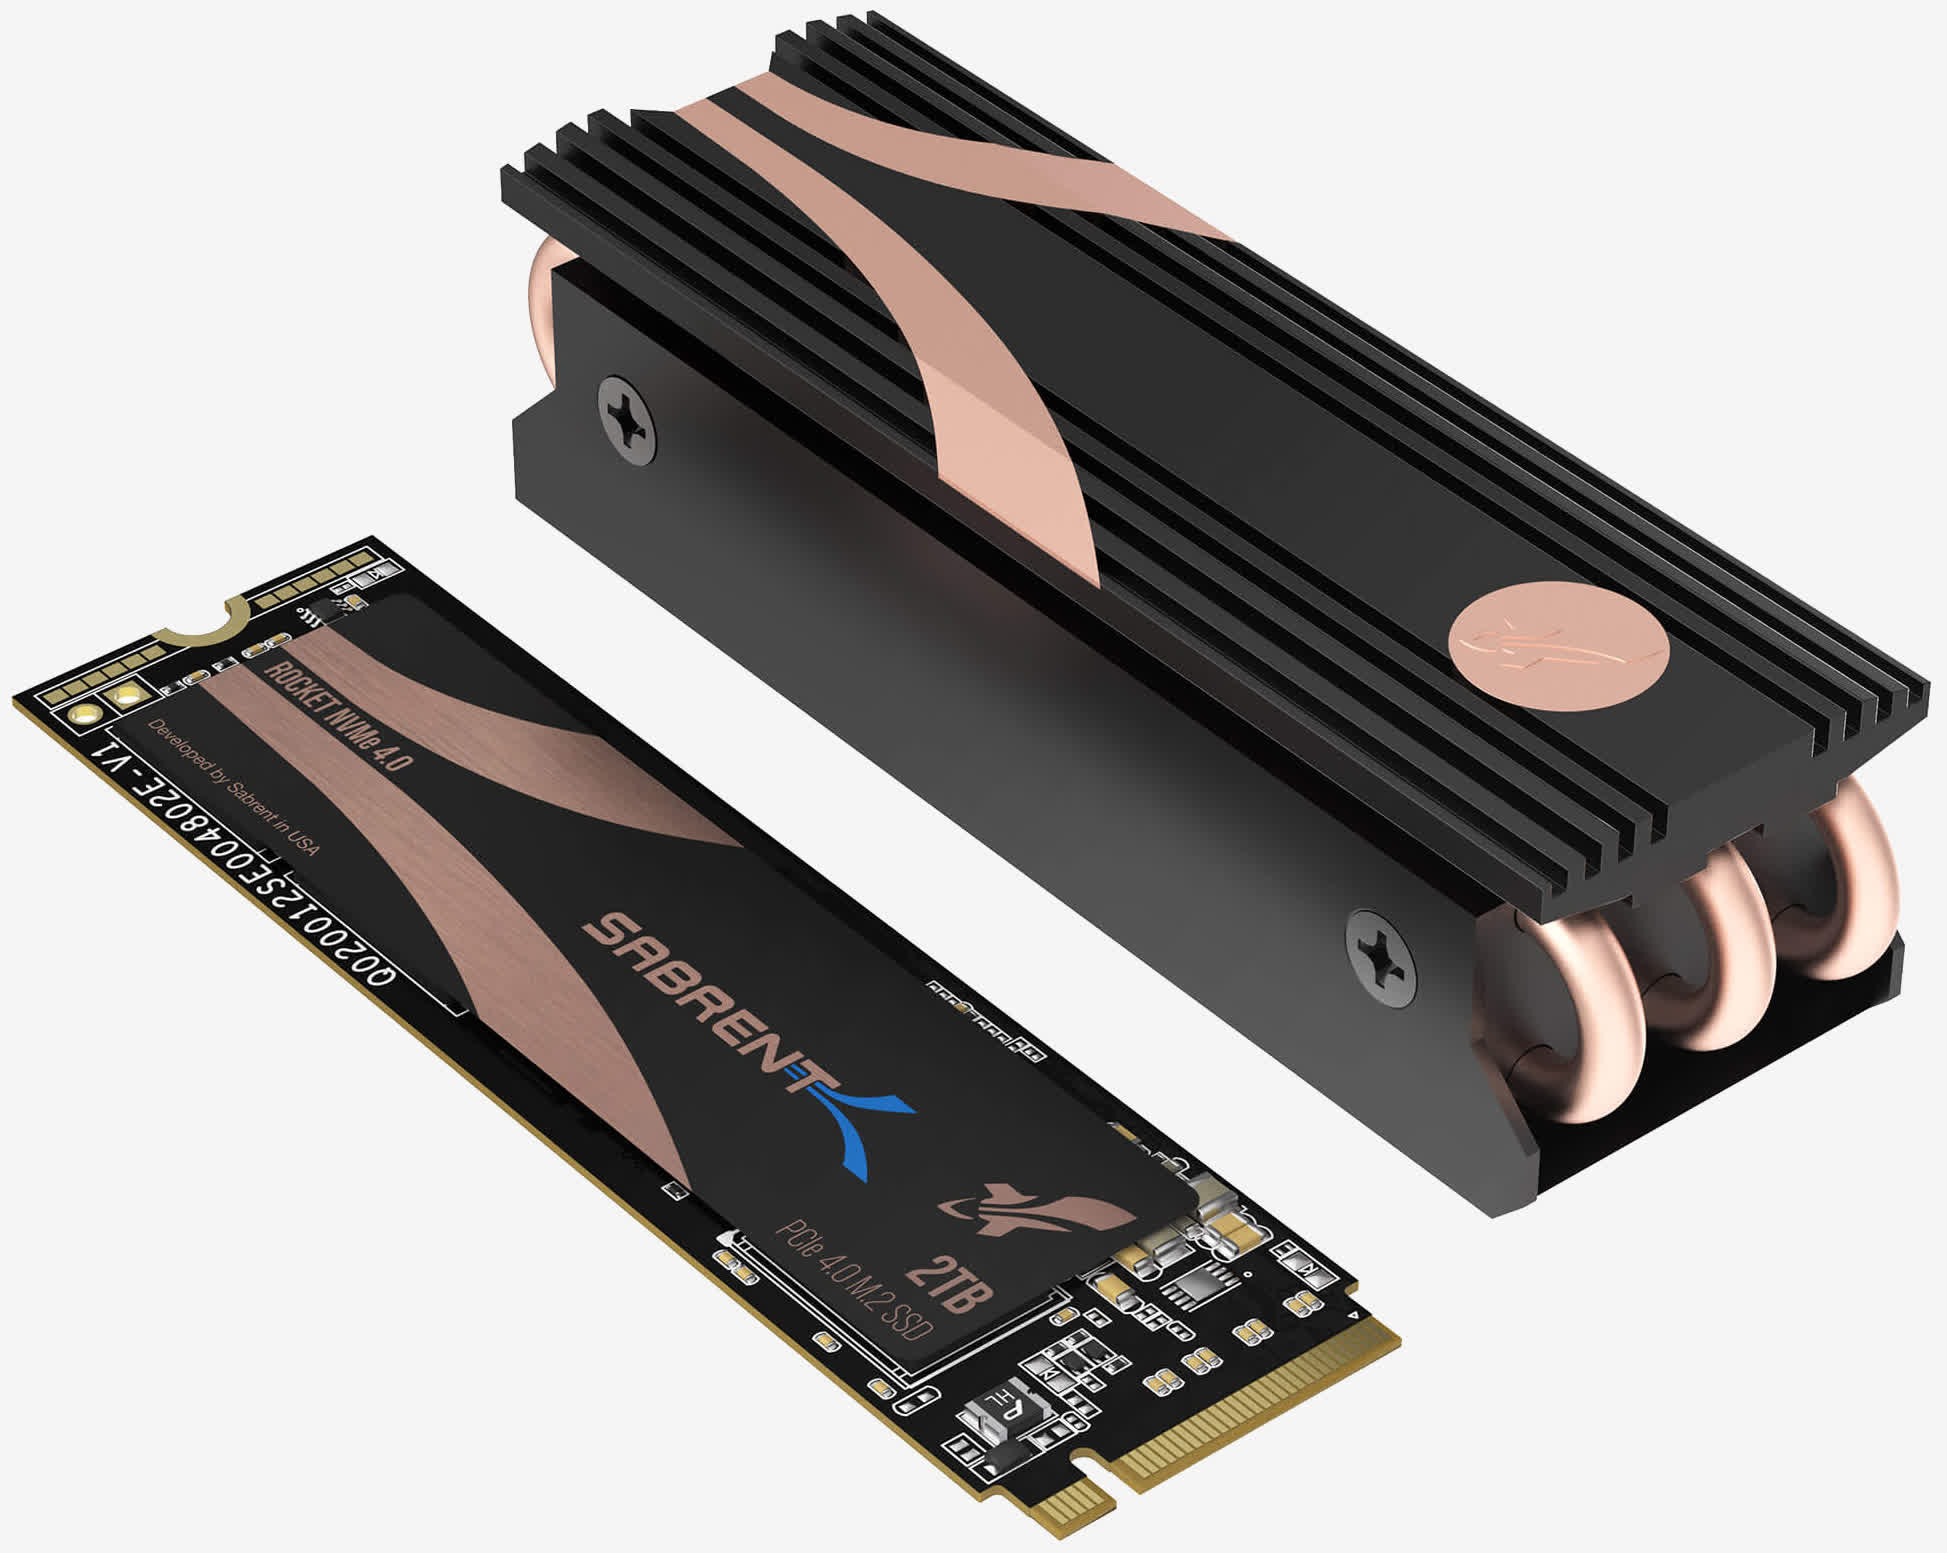 Deal Alert: Sabrent SSDs are up to 50% off today at Amazon